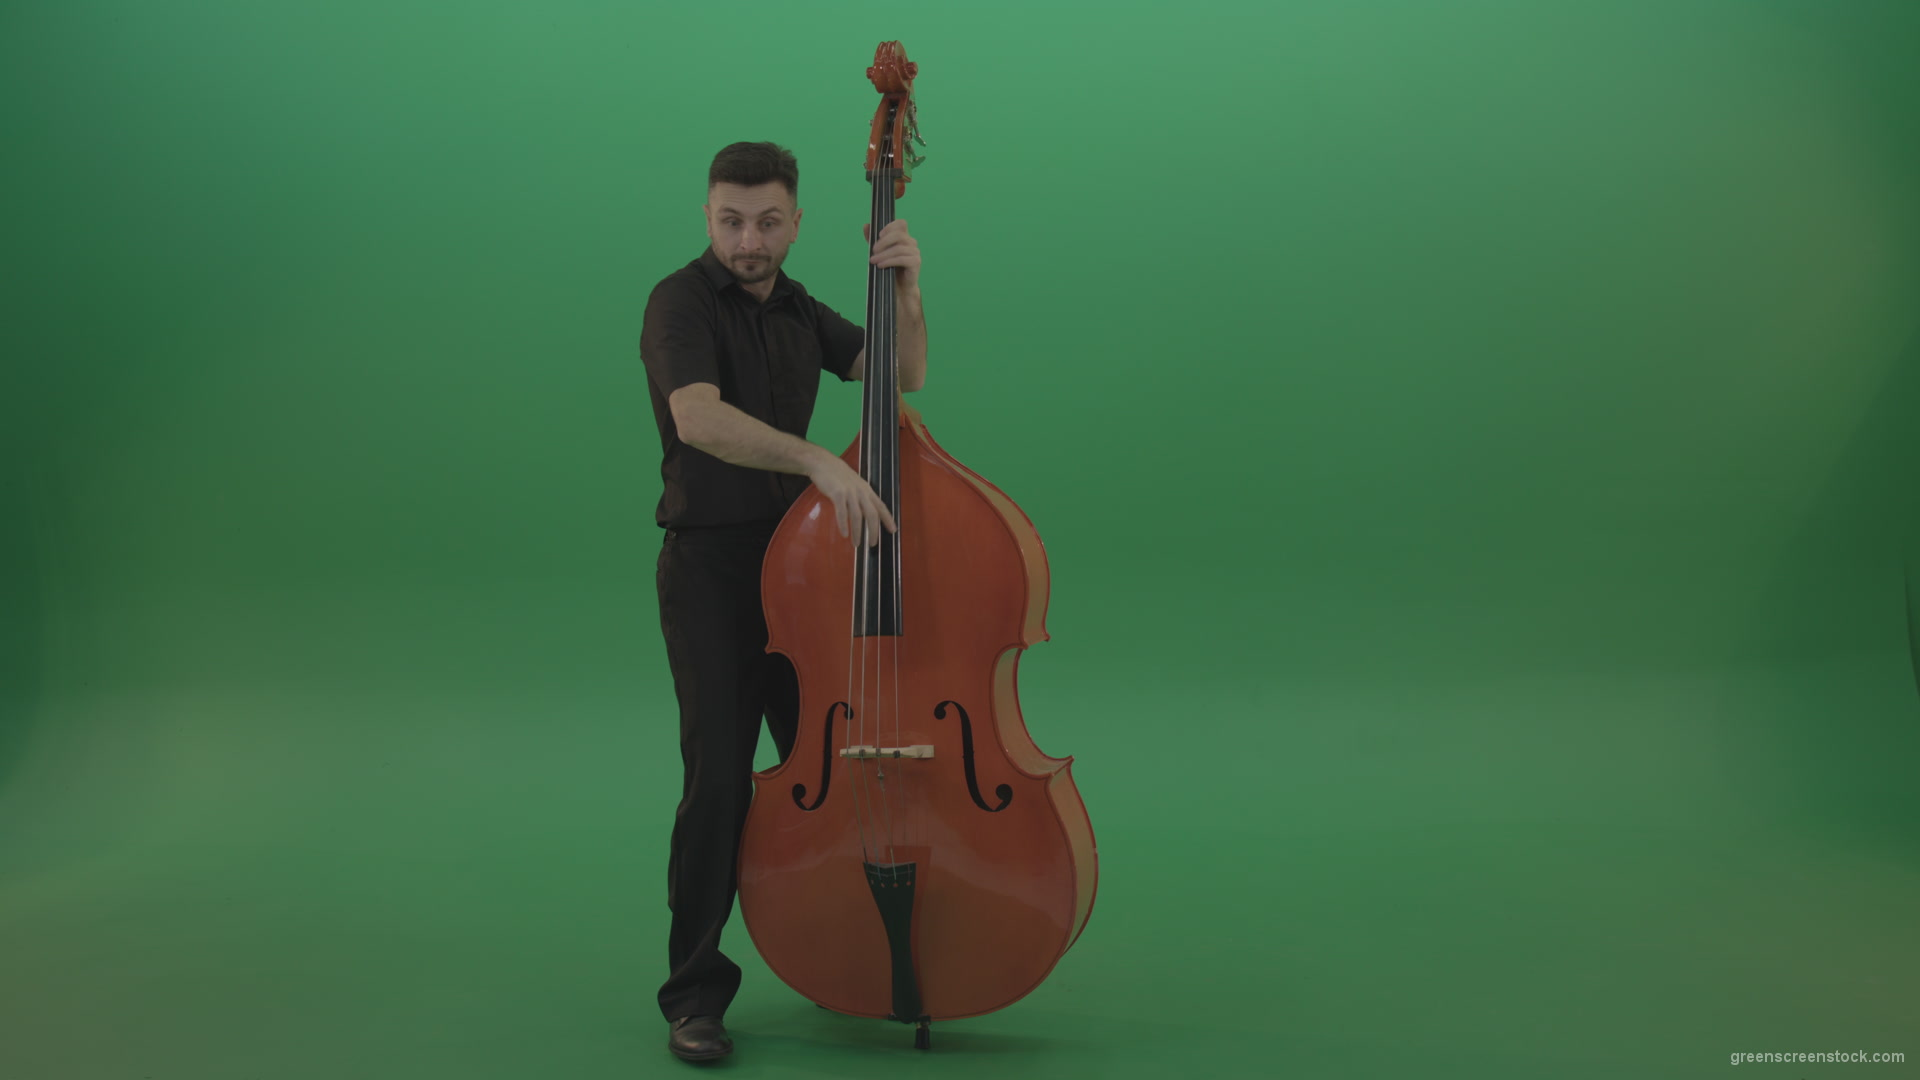 Full-size-man-in-black-uniform-play-jazz-rock-on-double-bass-String-music-instrument-isolated-on-green-screen_009 Green Screen Stock